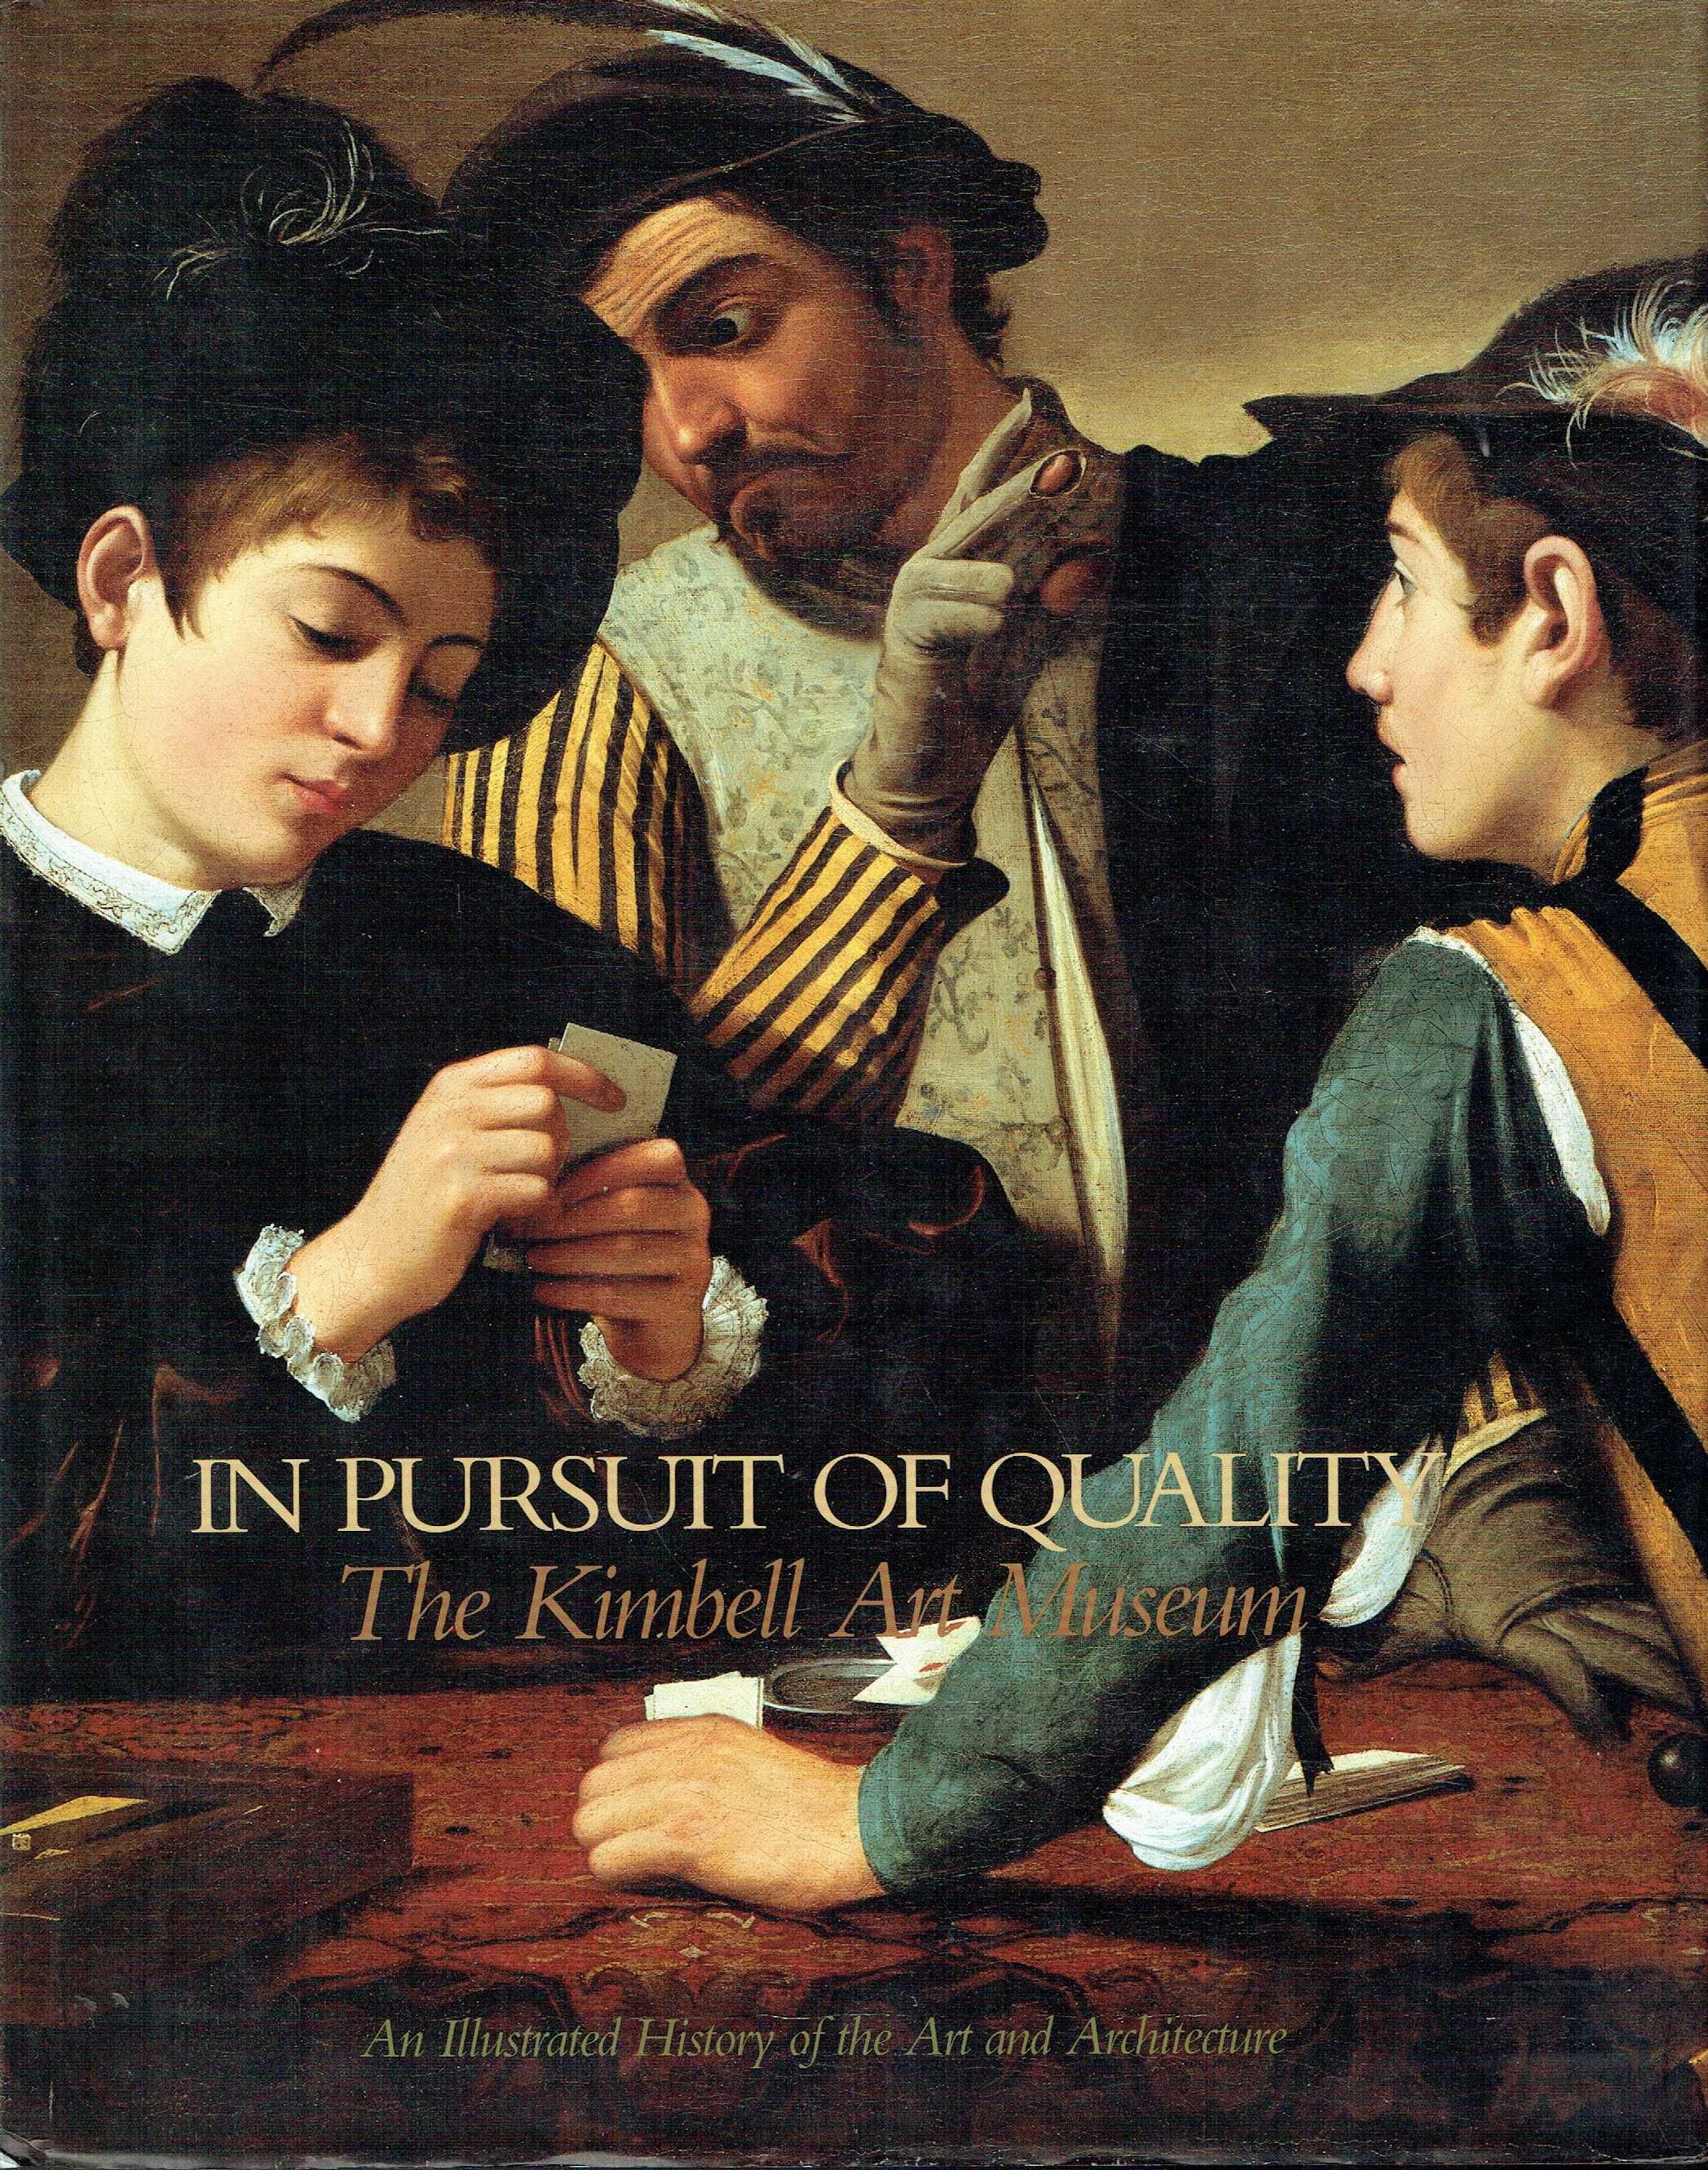 3123

In Pursuit of Quality: The Kimbell Art Museum